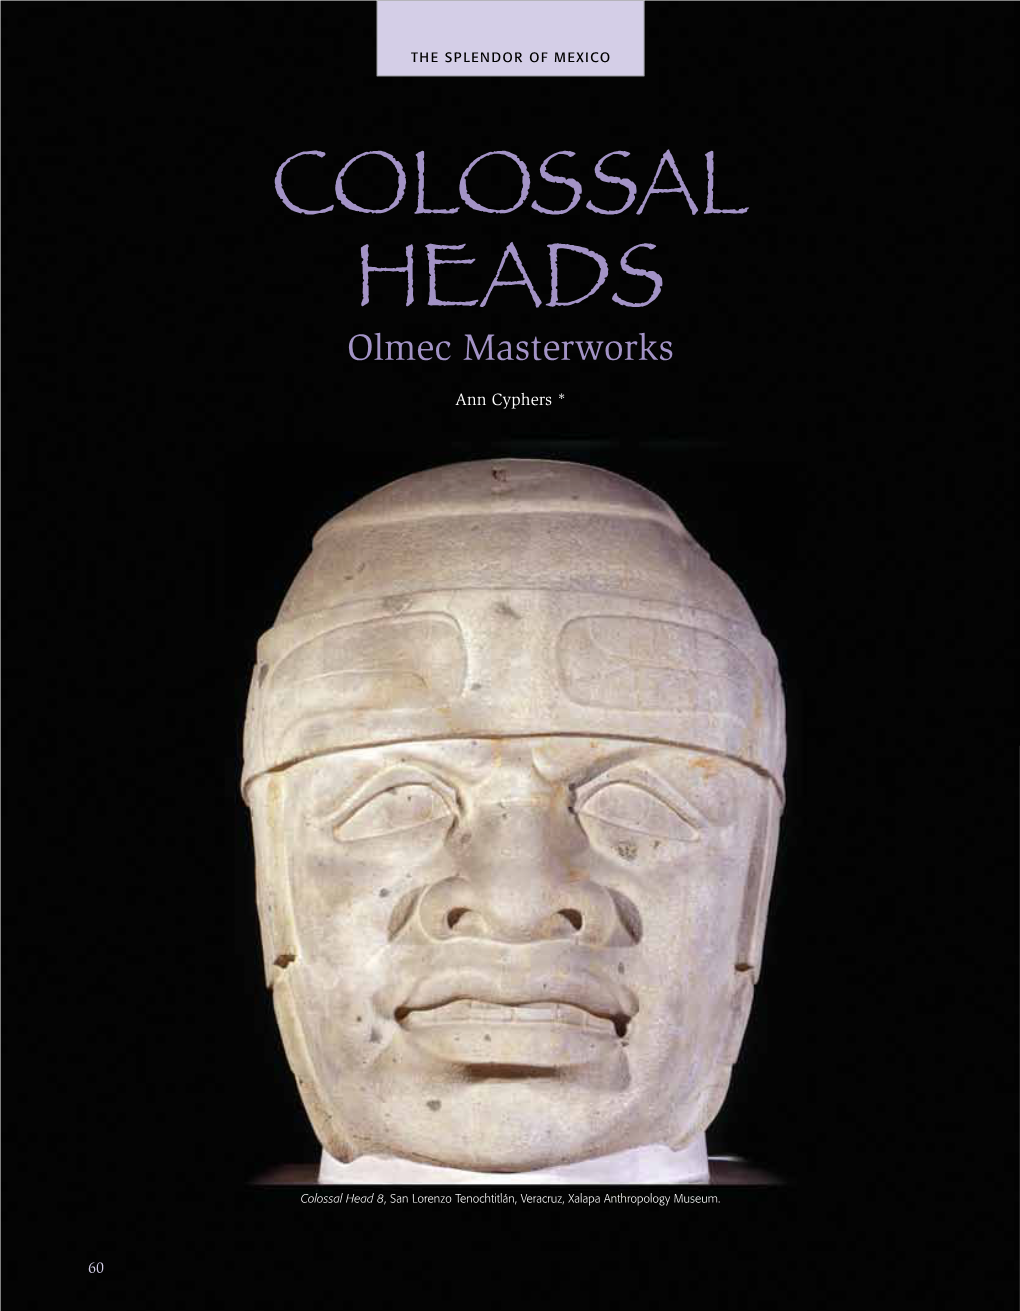 Colossal Heads, One Stands Out: That They Were Portraits of Important Personages Like Rulers and Priests